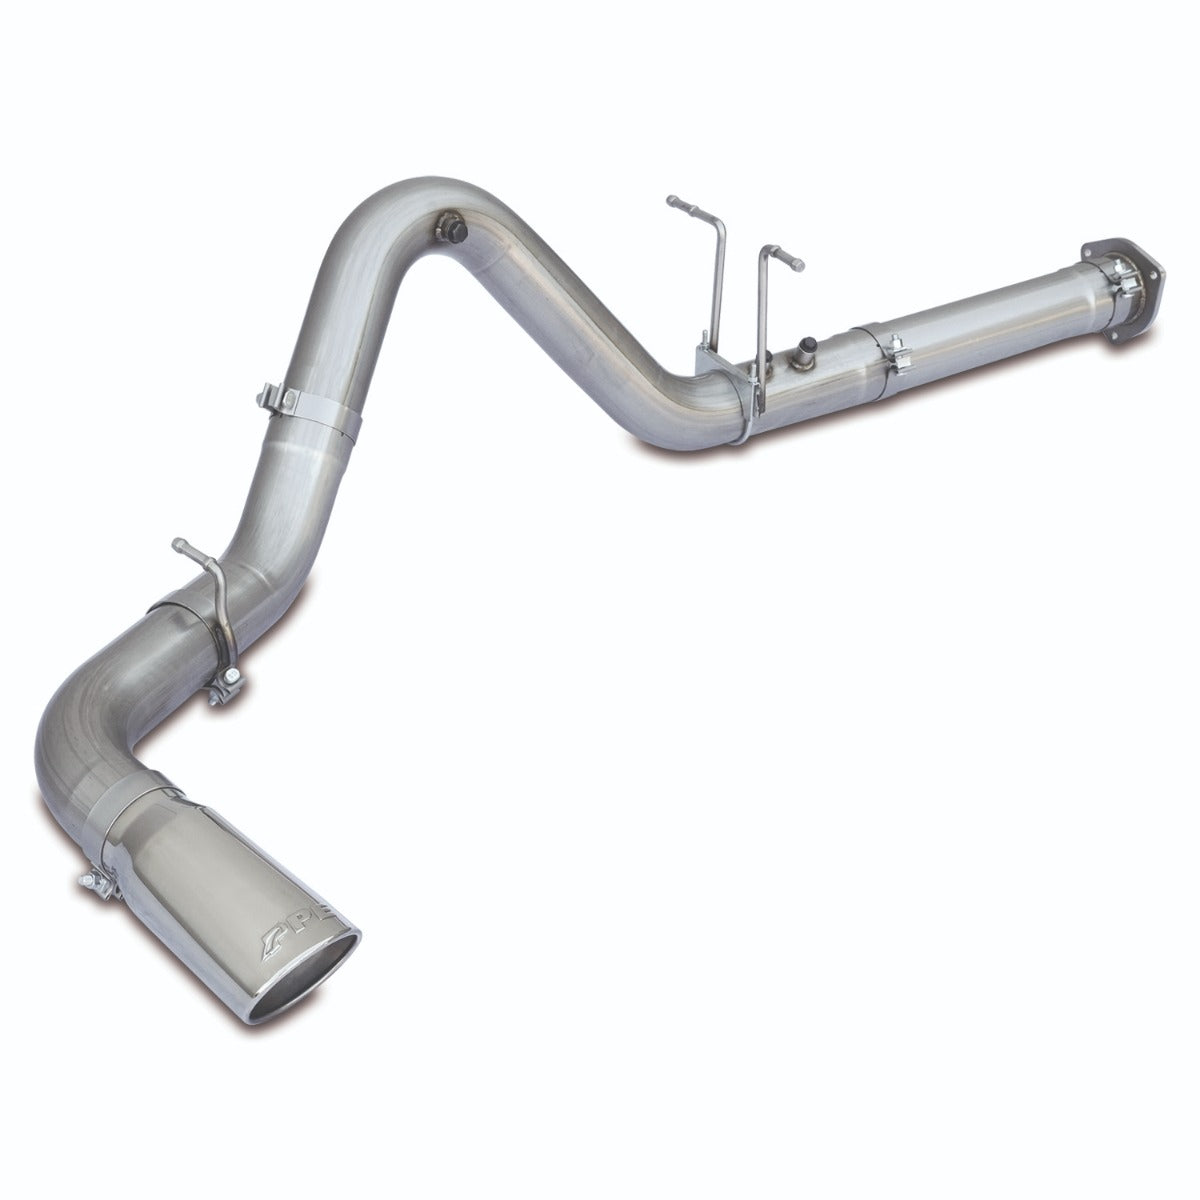 PPE Diesel 2007-2019 GM 6.6L Duramax 304 Stainless Steel Cat Back Performance Exhaust System with Polished Tip 117010350